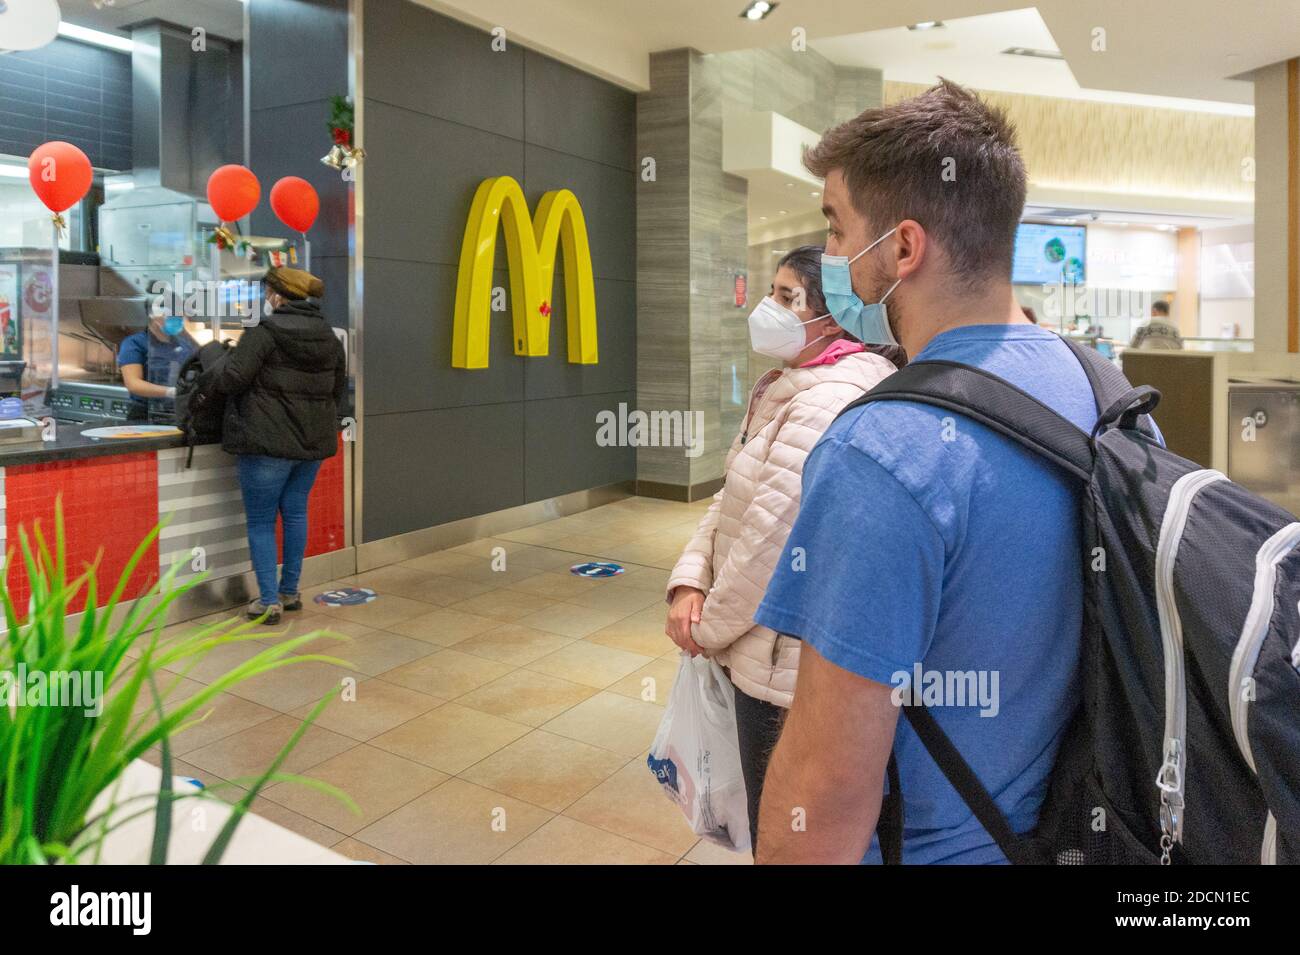 Young people waiting in line in a McDonald's during the Covid-19 pandemic. Stock Photo